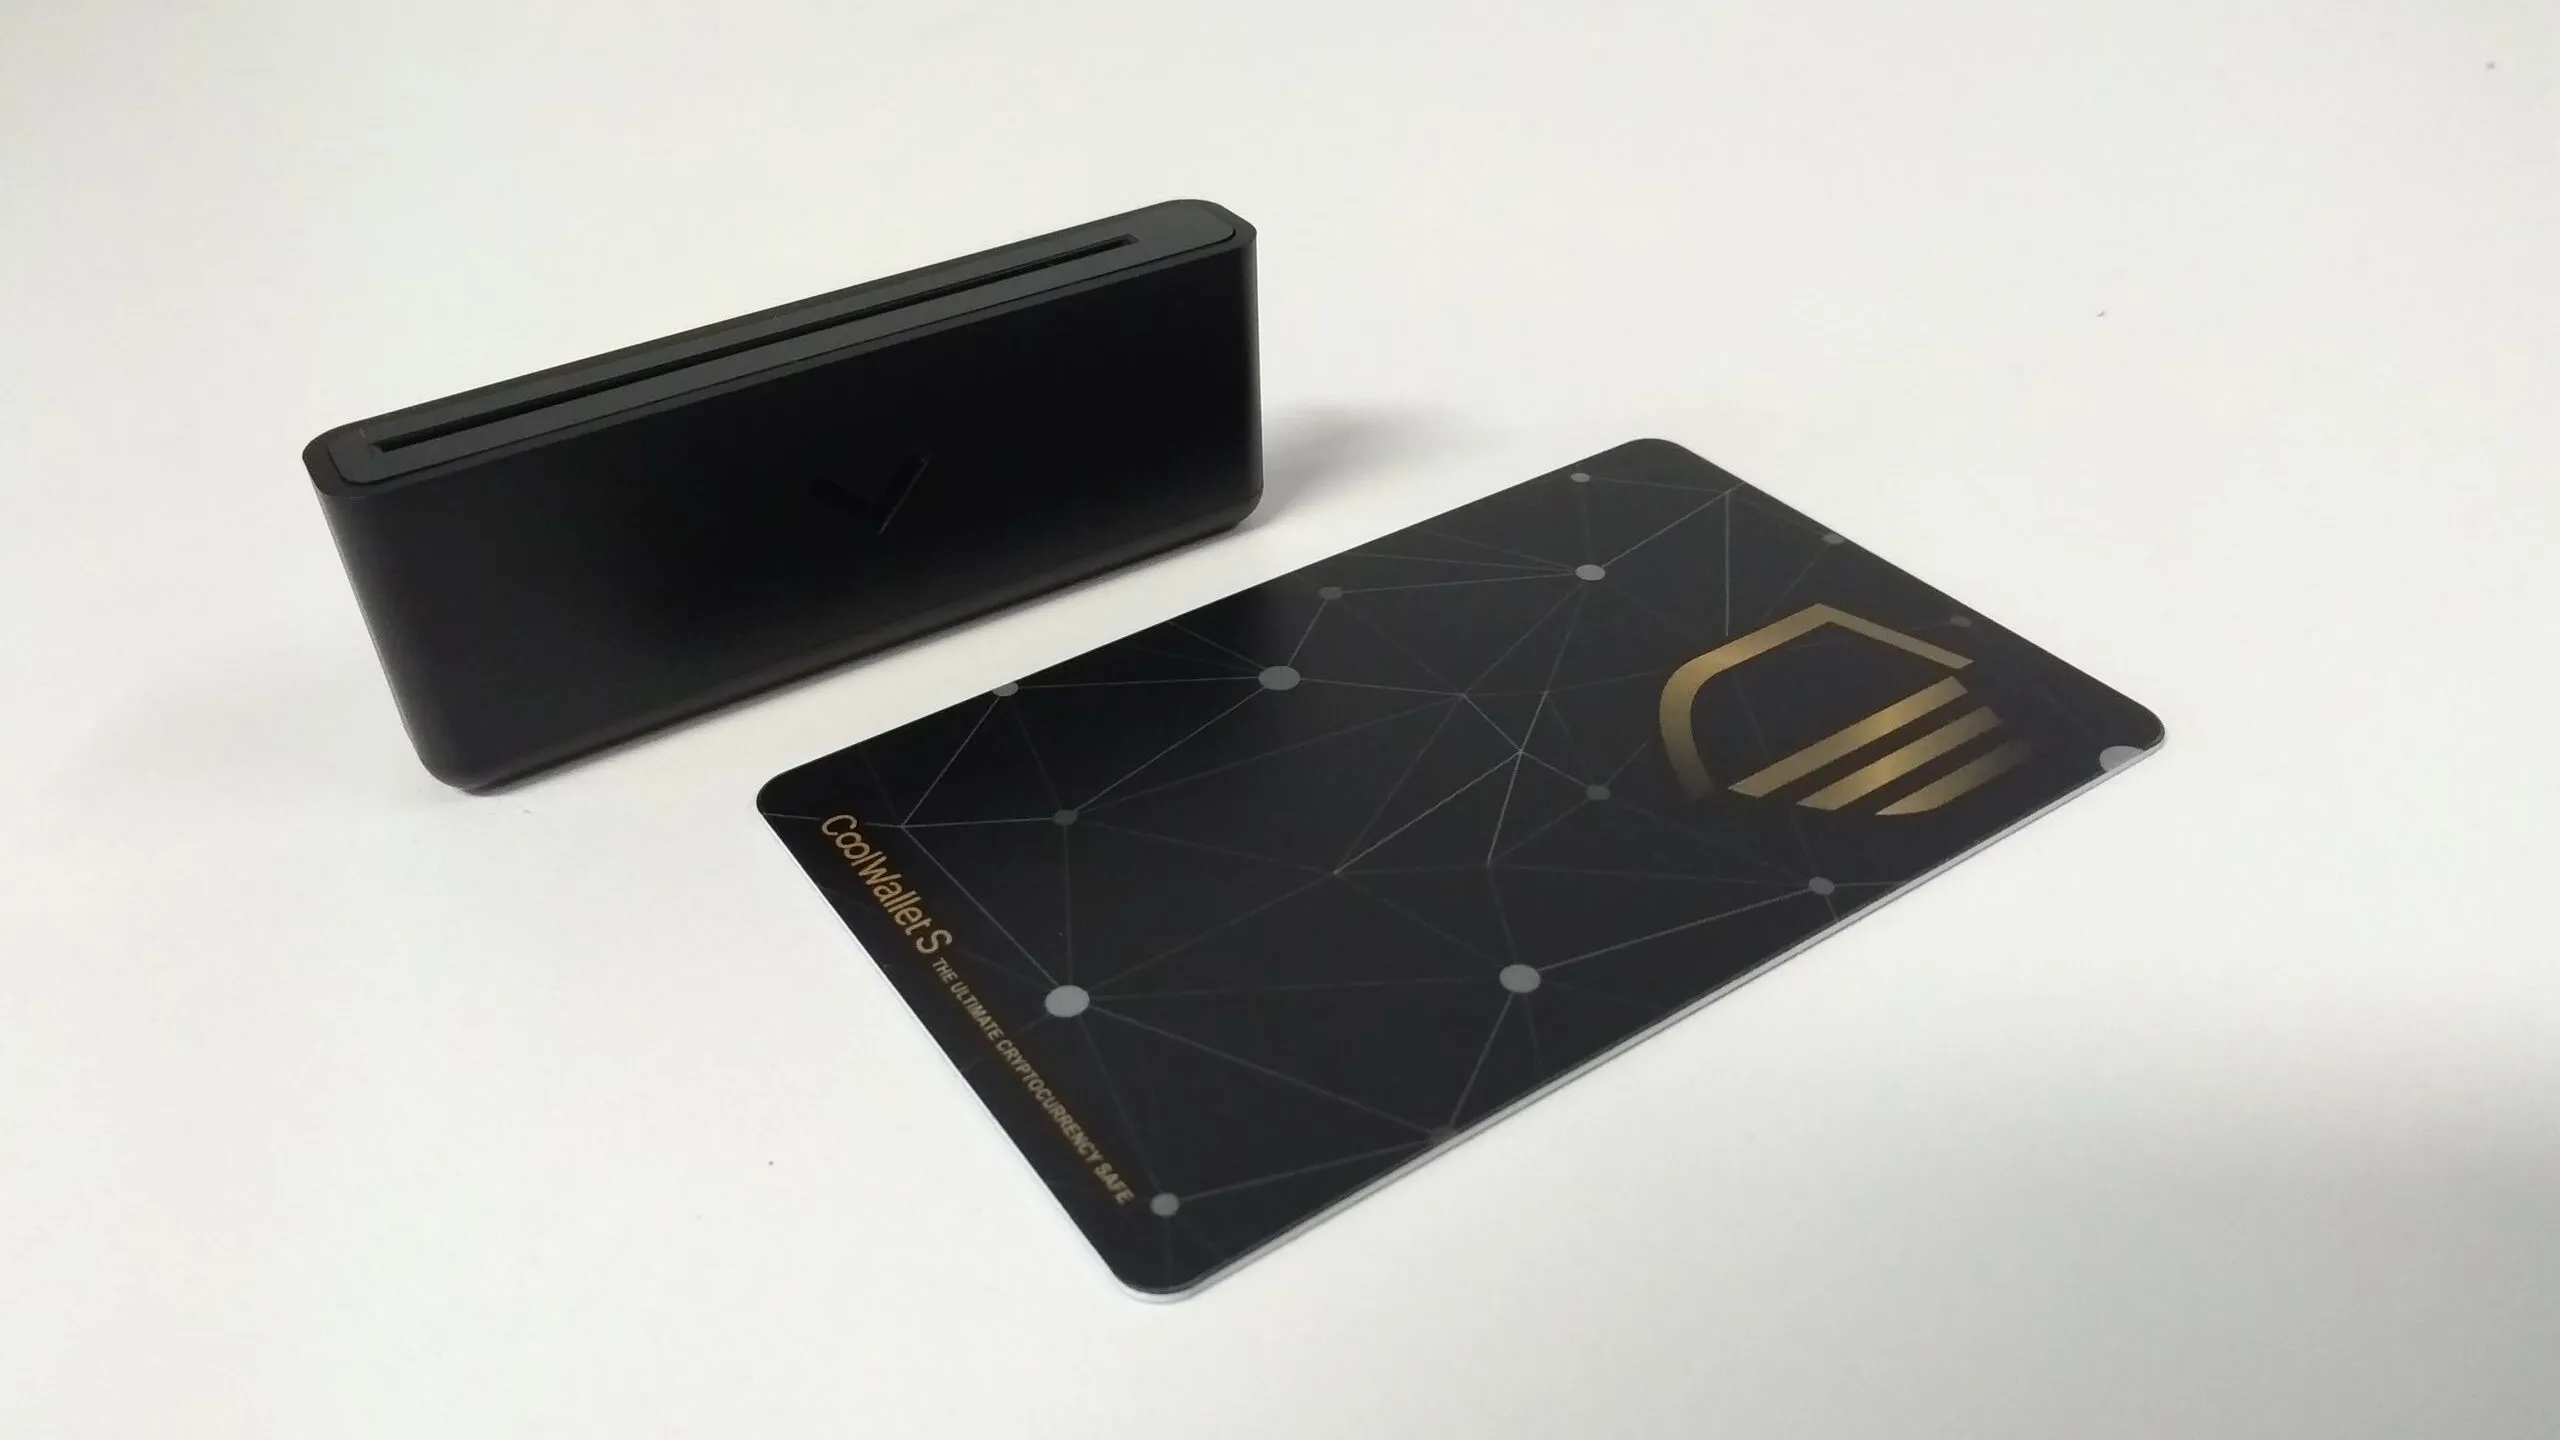 D'Cent Biometric Wallet, Cryptocurrency Hardware Wallet, Bluetooth, Supporting Bitcoin, Ethereum & More